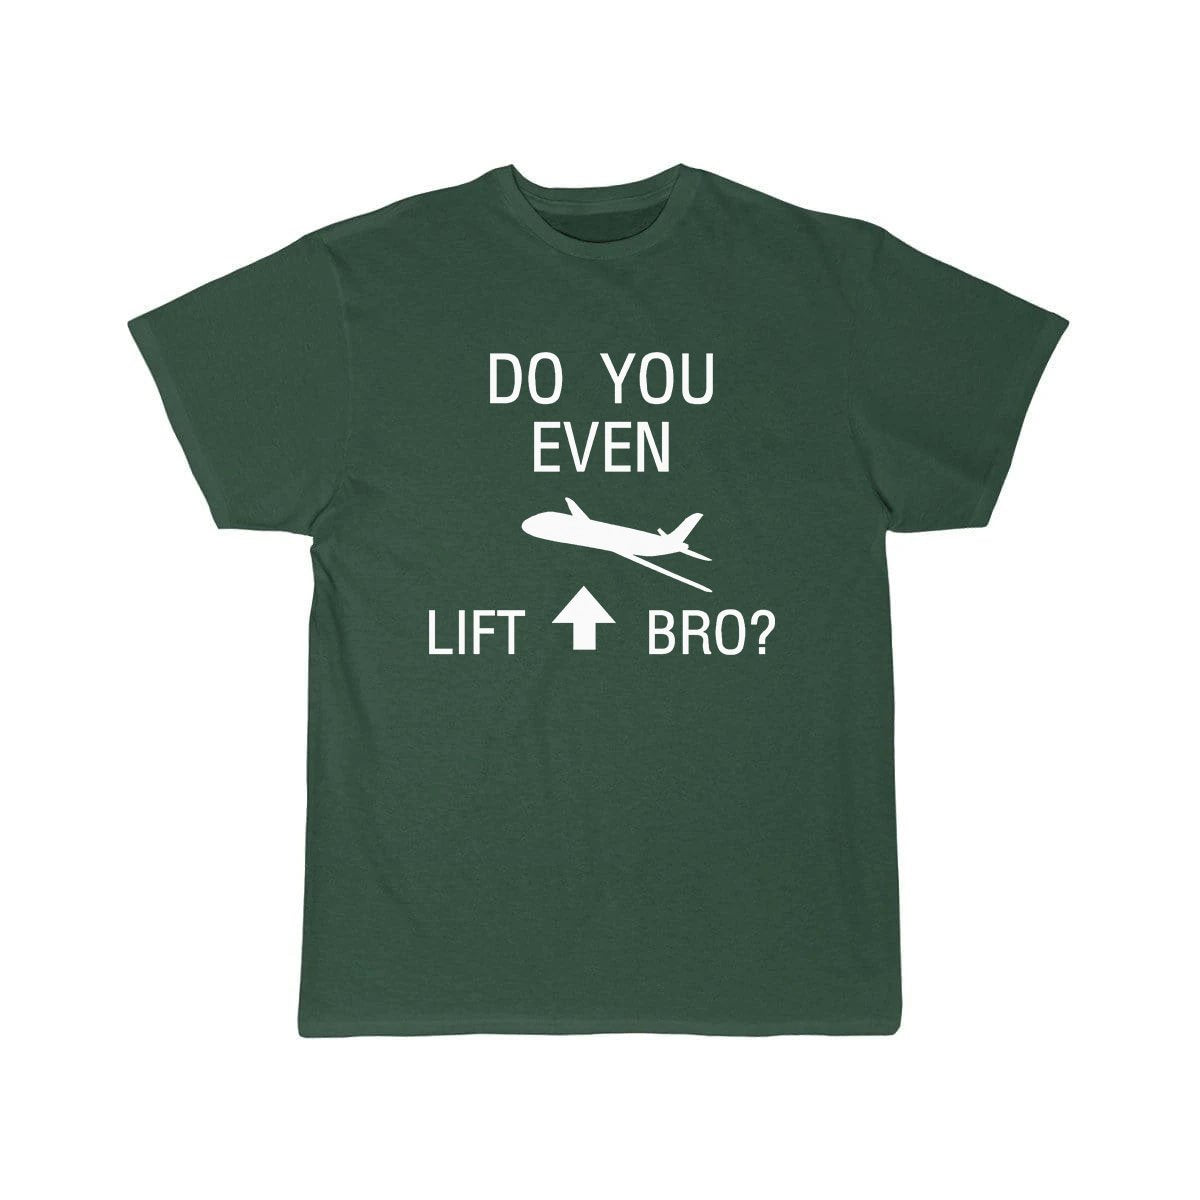 DO YOU EVEN LIFT BRO FUNNY SCIENCE FLIGHT WITH PLANE T-SHIRT THE AV8R